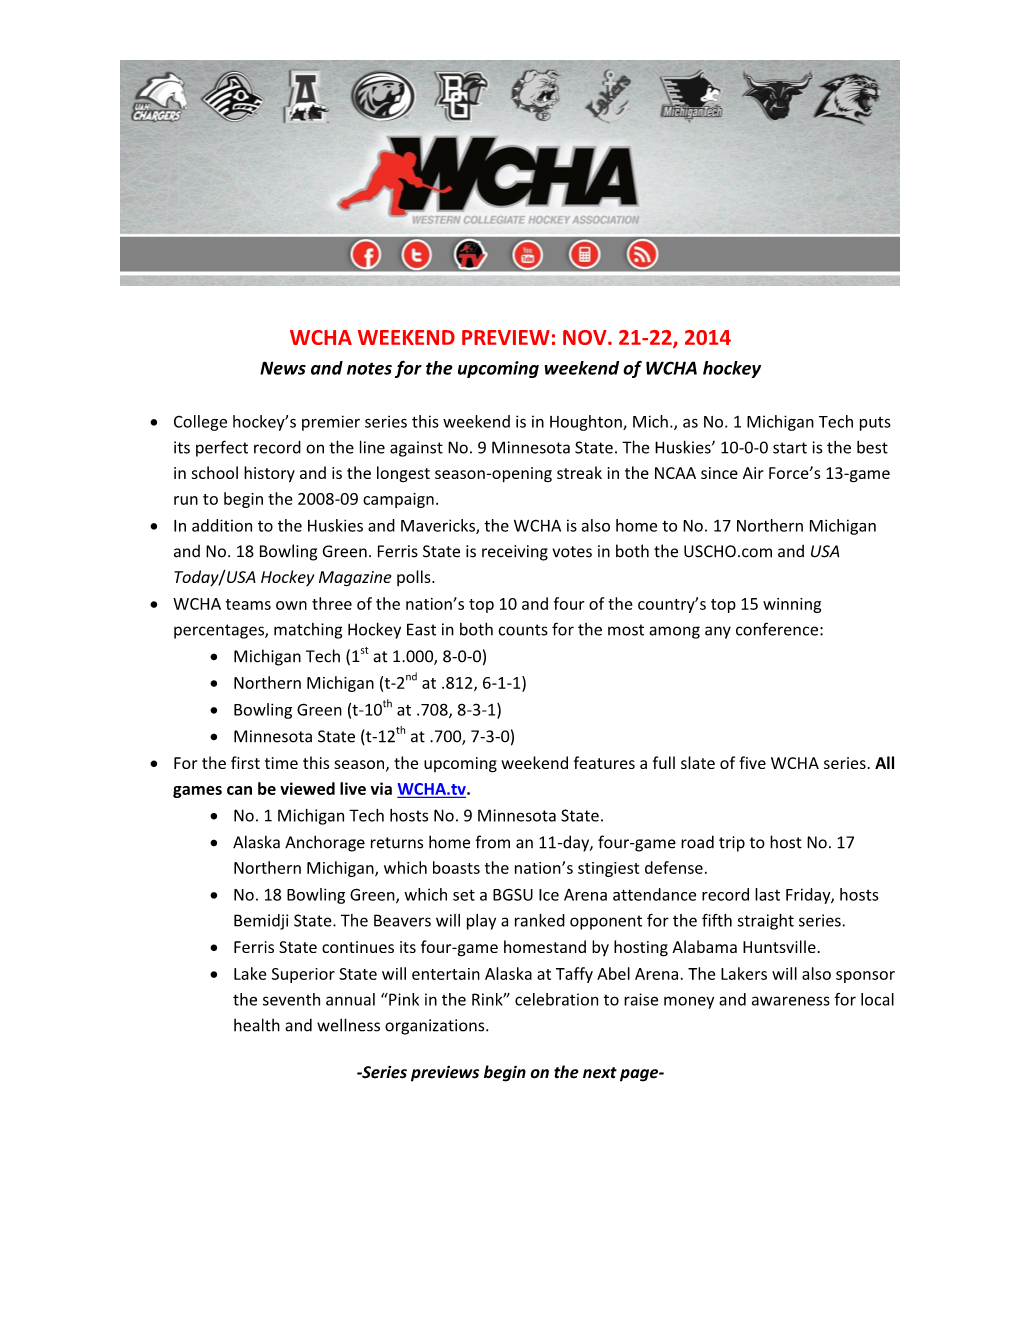 WCHA WEEKEND PREVIEW: NOV. 21-22, 2014 News and Notes for the Upcoming Weekend of WCHA Hockey